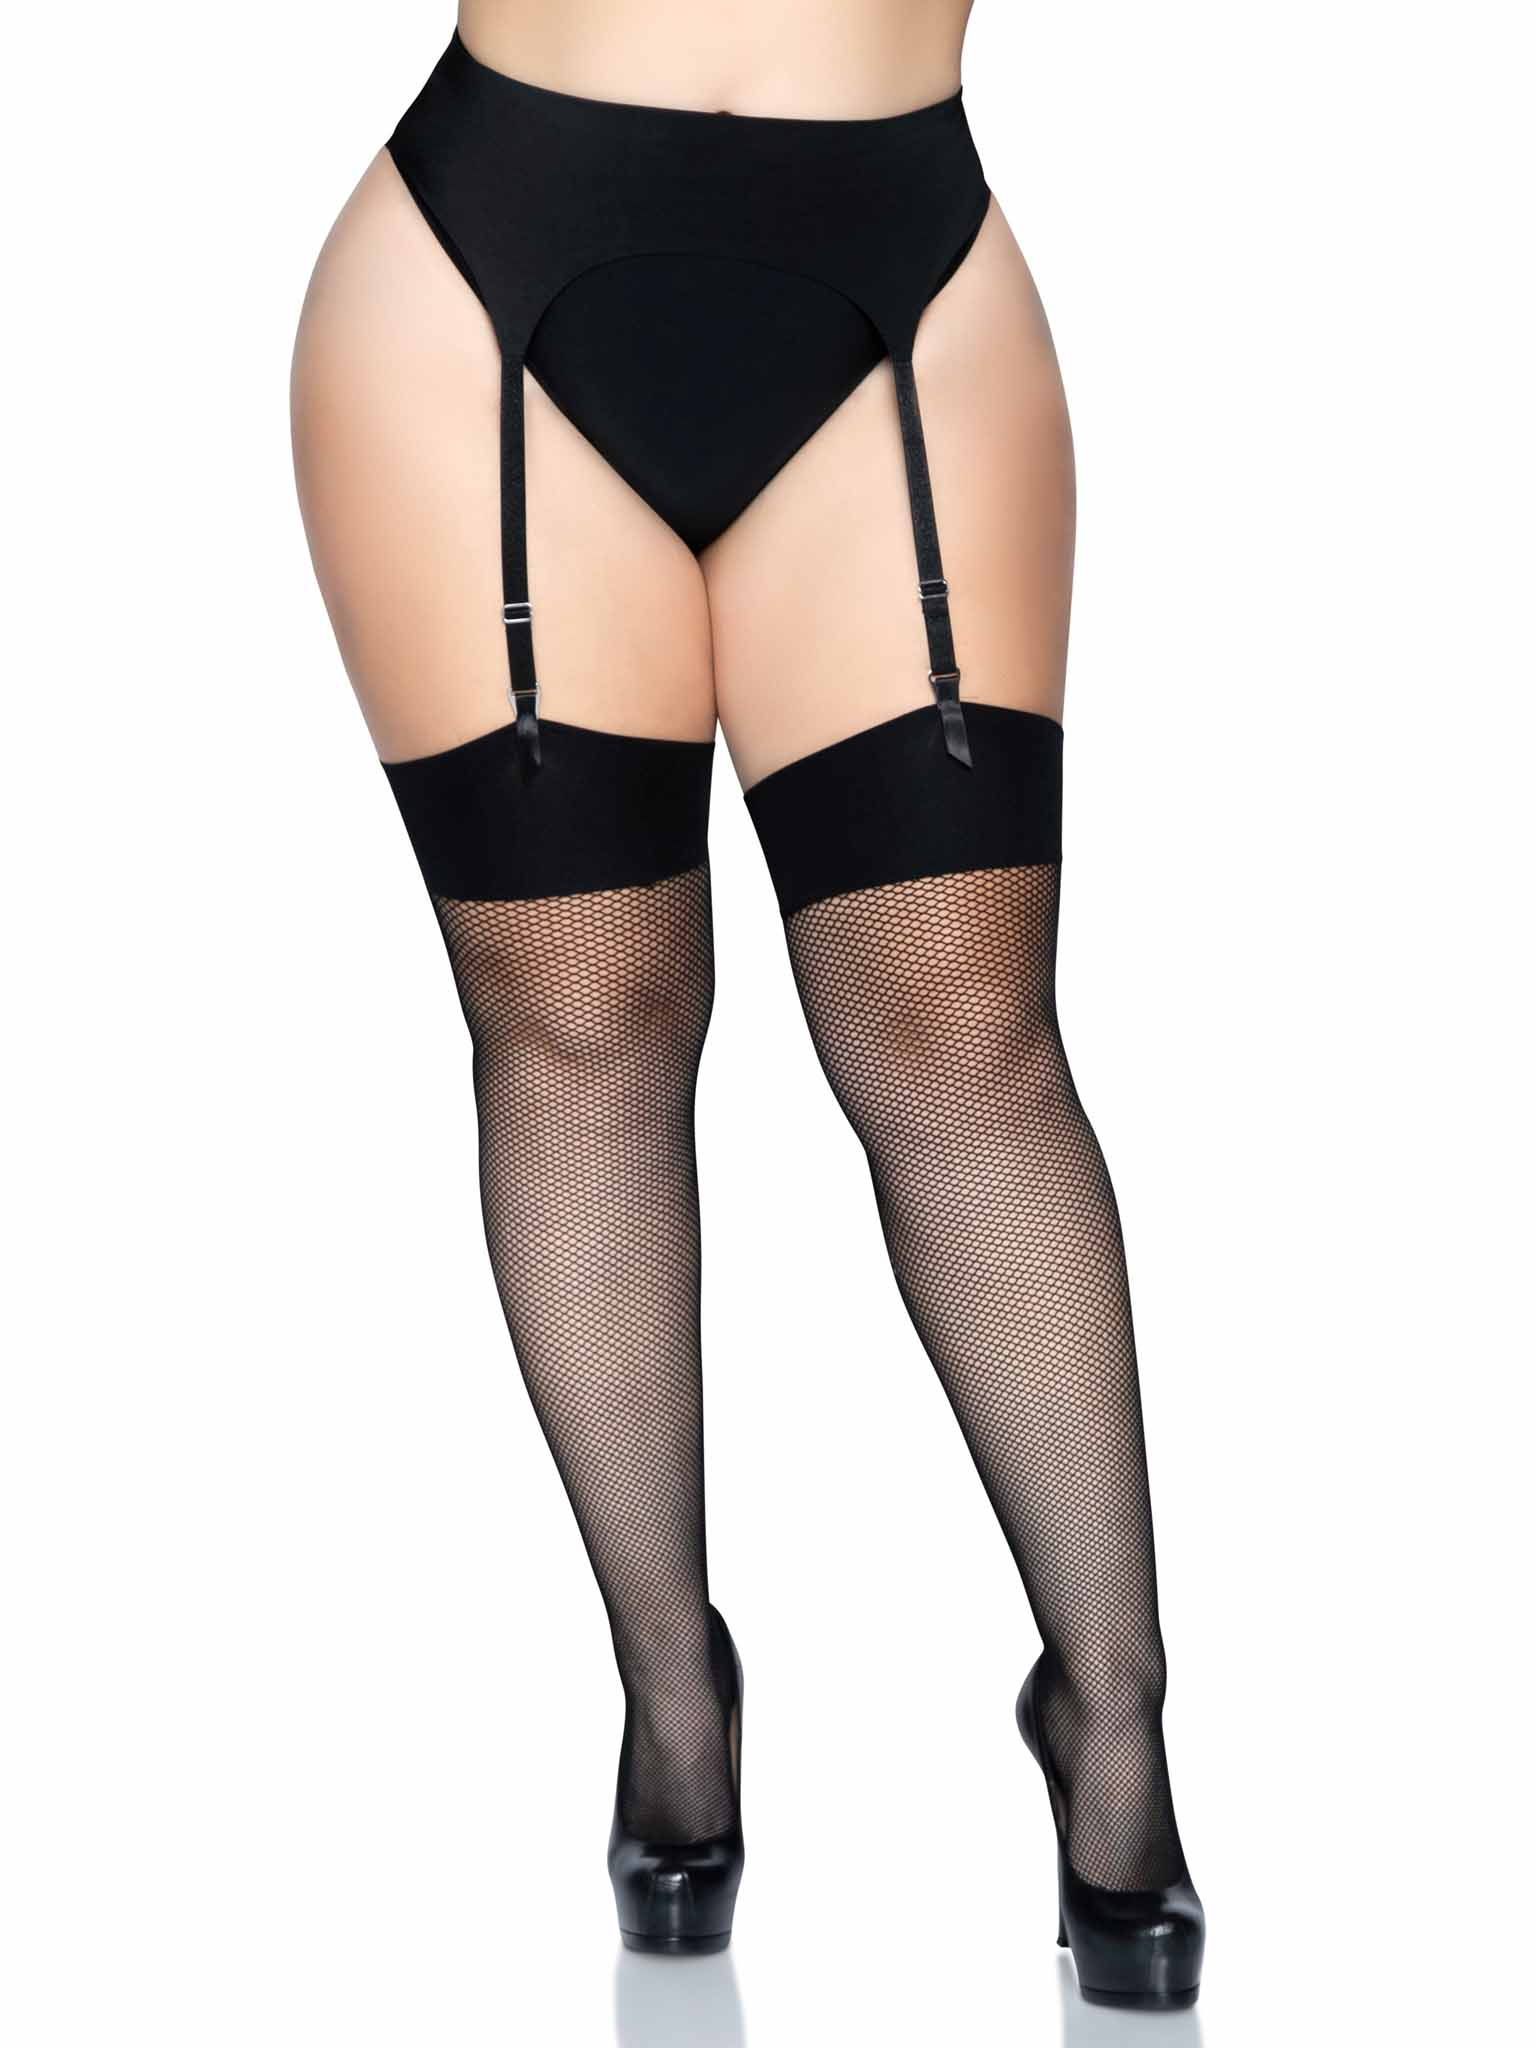 FISHNET THIGH HIGH STOCKINGS W/ WIDE BAND 2X